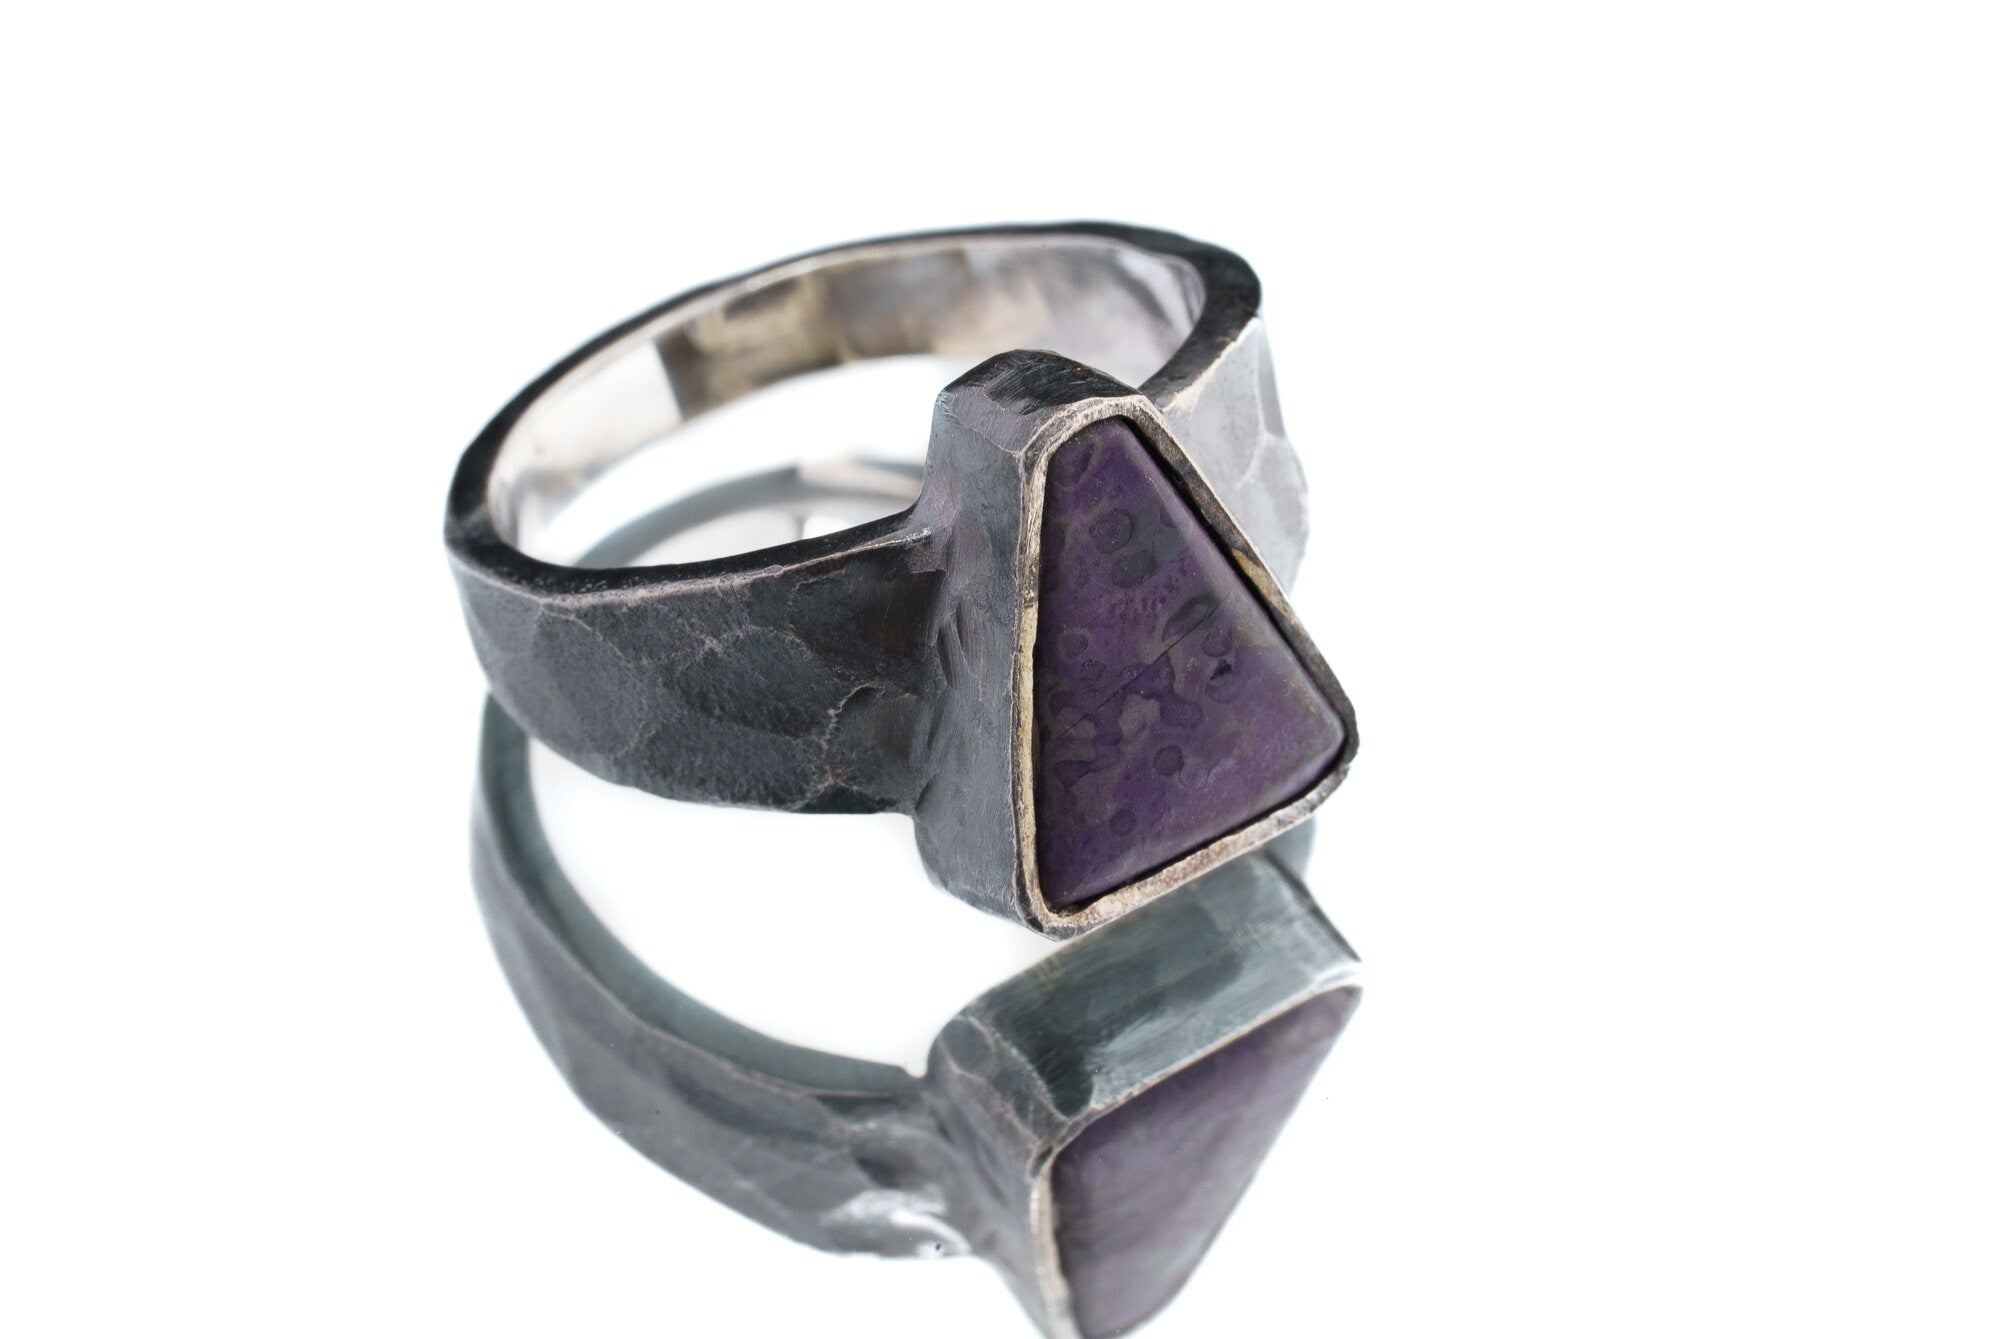 Triangular AAA Sugilite Cabochon - Men's / Unisex Large Crystal Ring - Size 7 1/2 US - 925 Sterling Silver - Hammer Textured & Oxidised